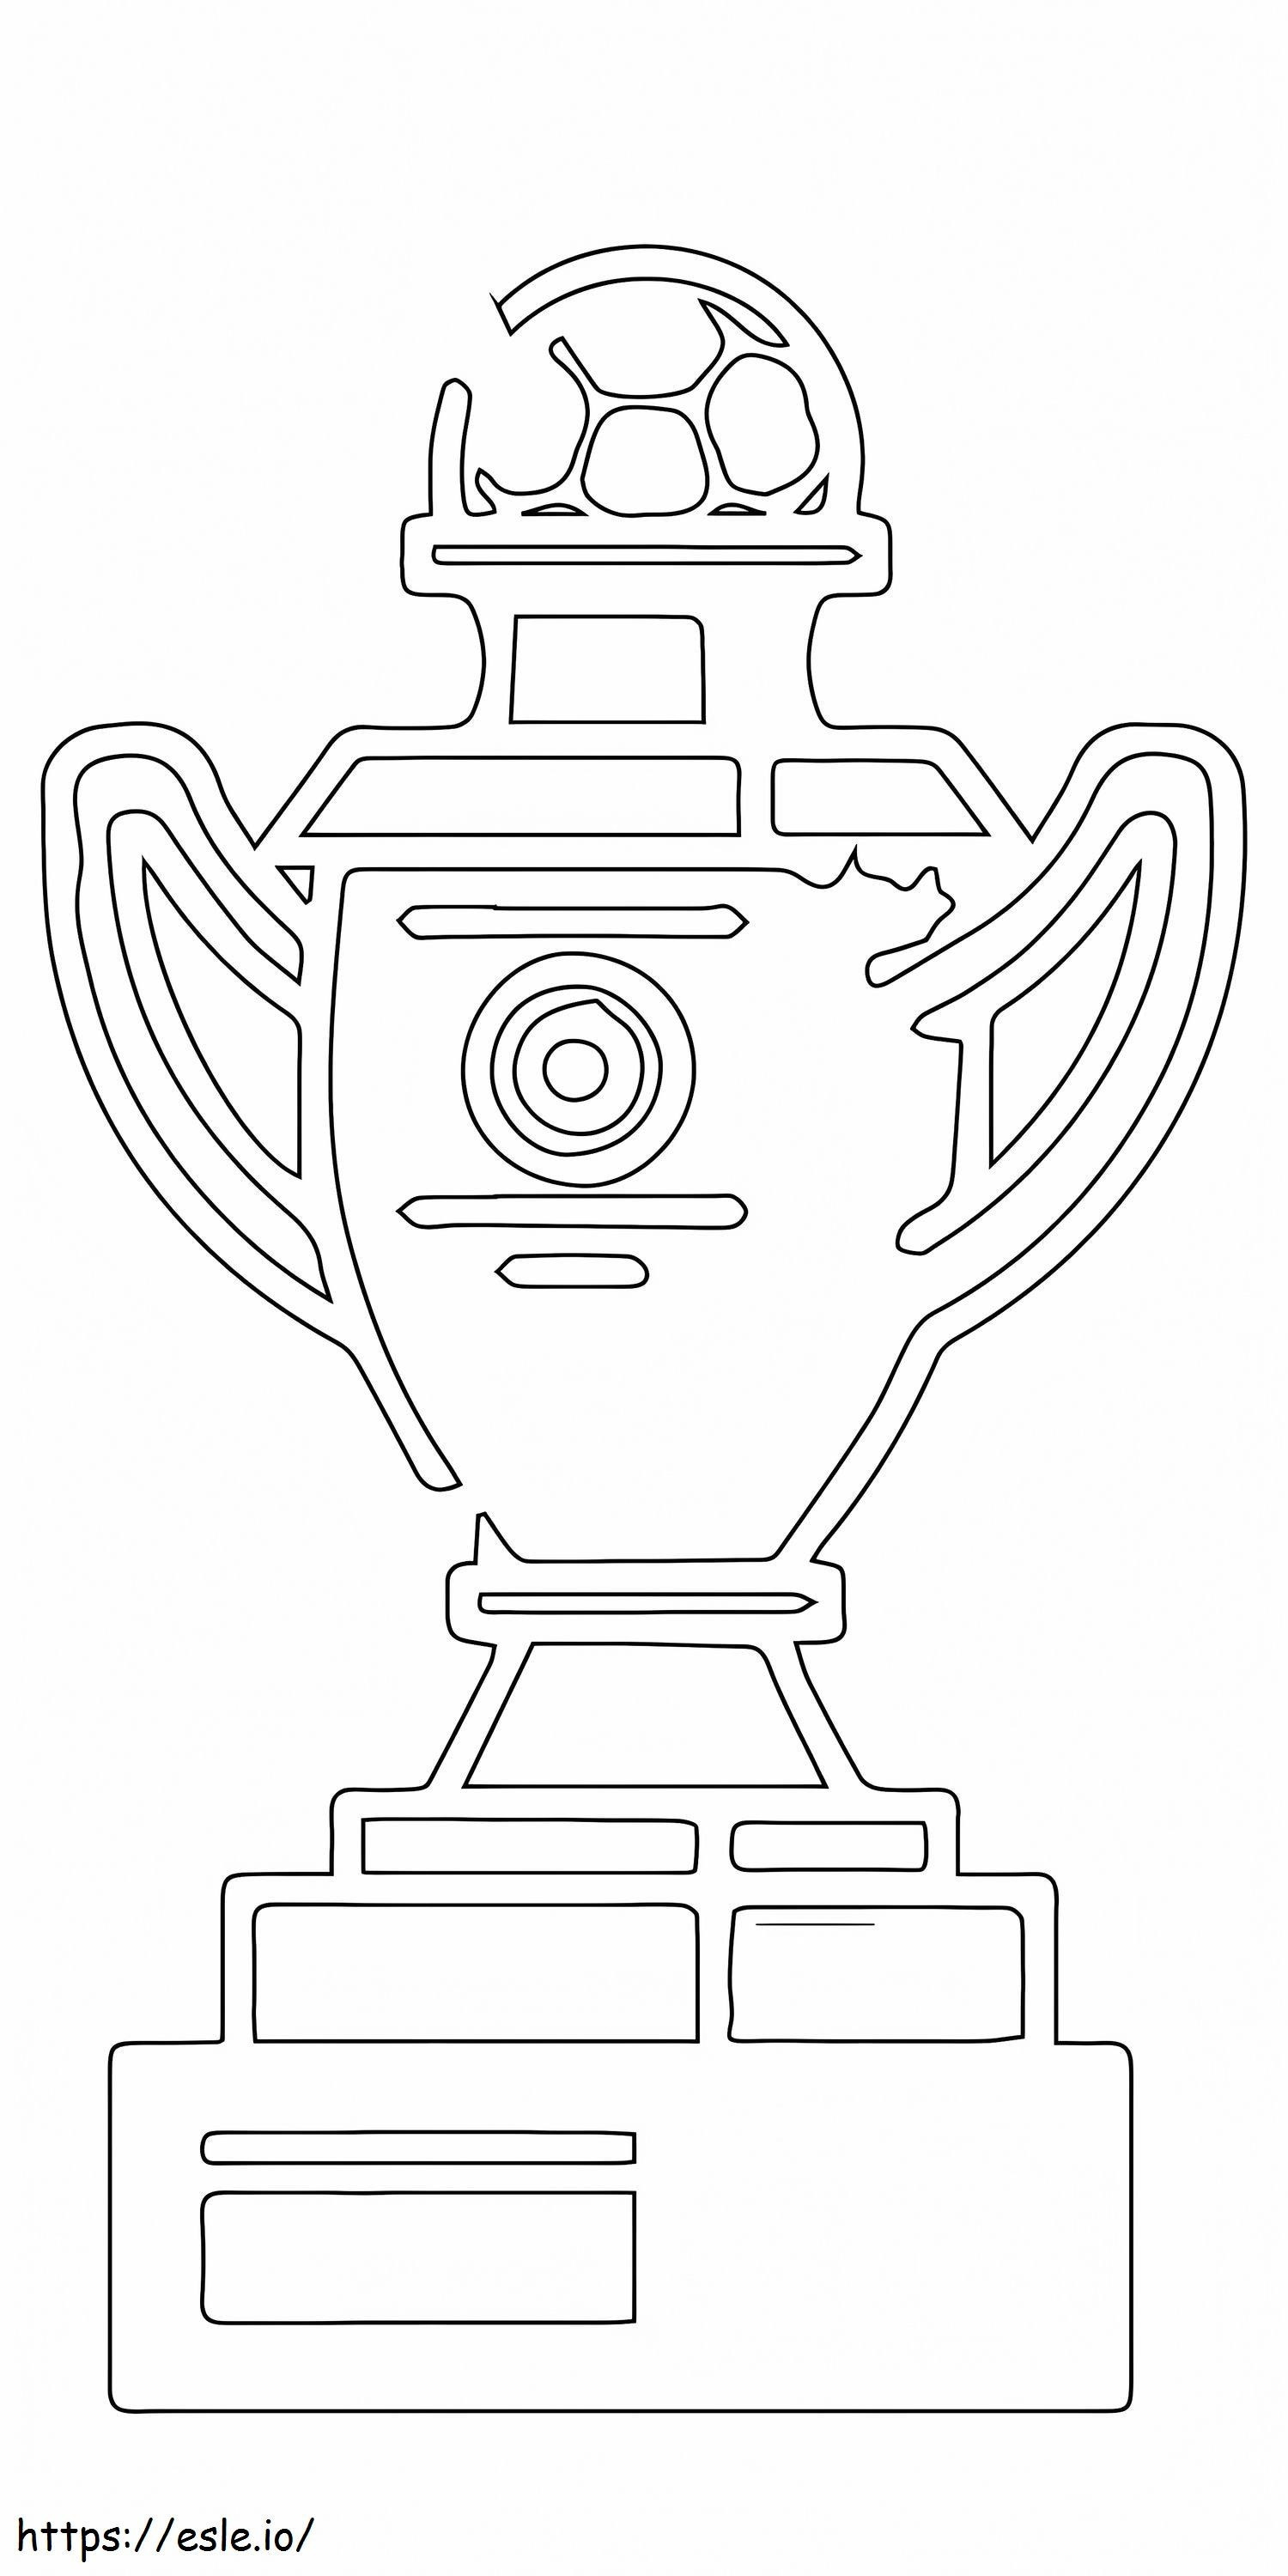 Football World Cup Trophy coloring page